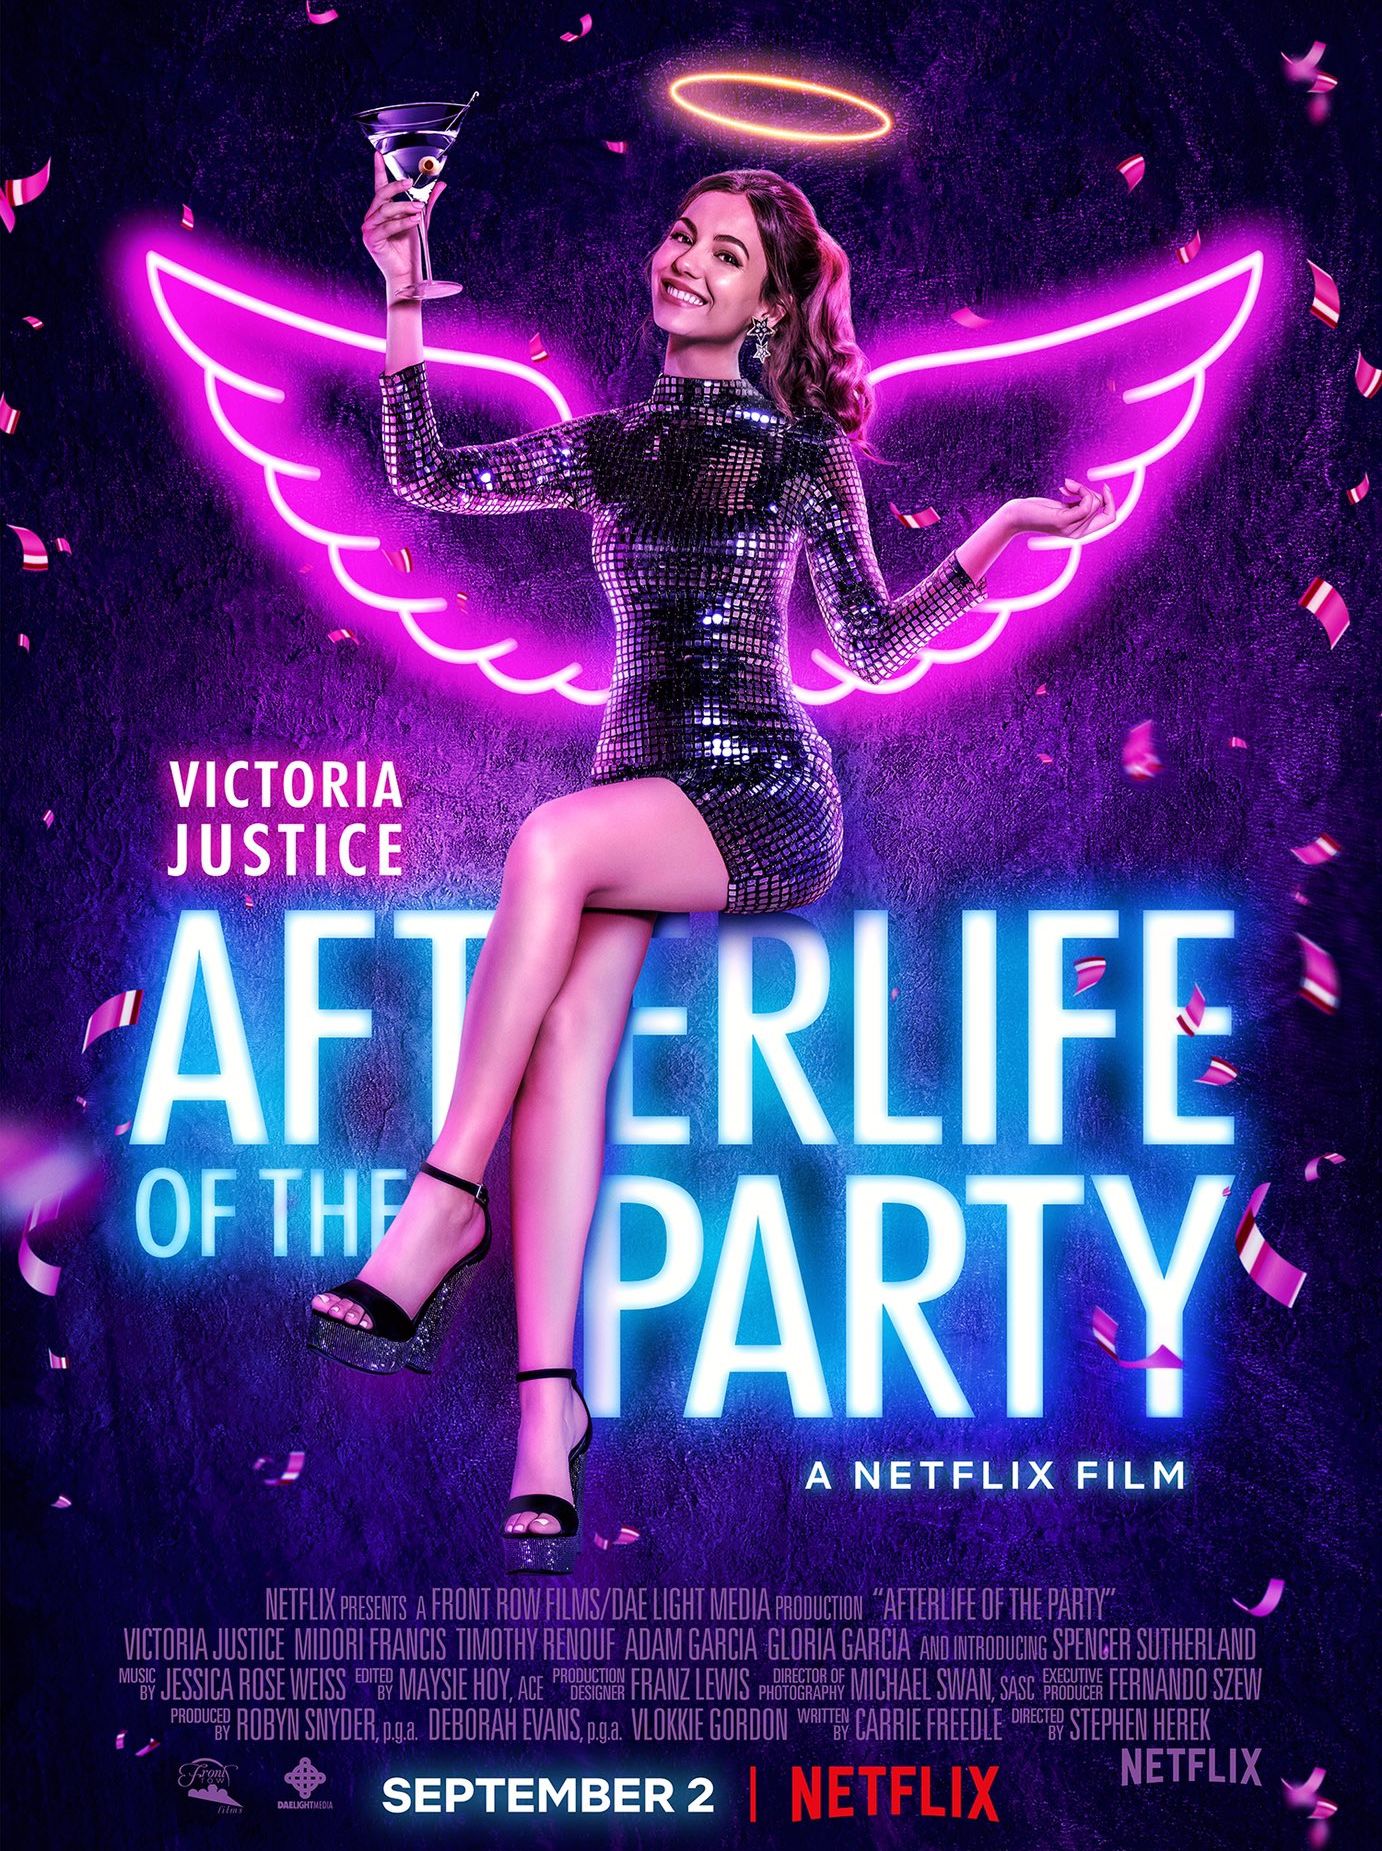 Where to watch Afterlife of the Party